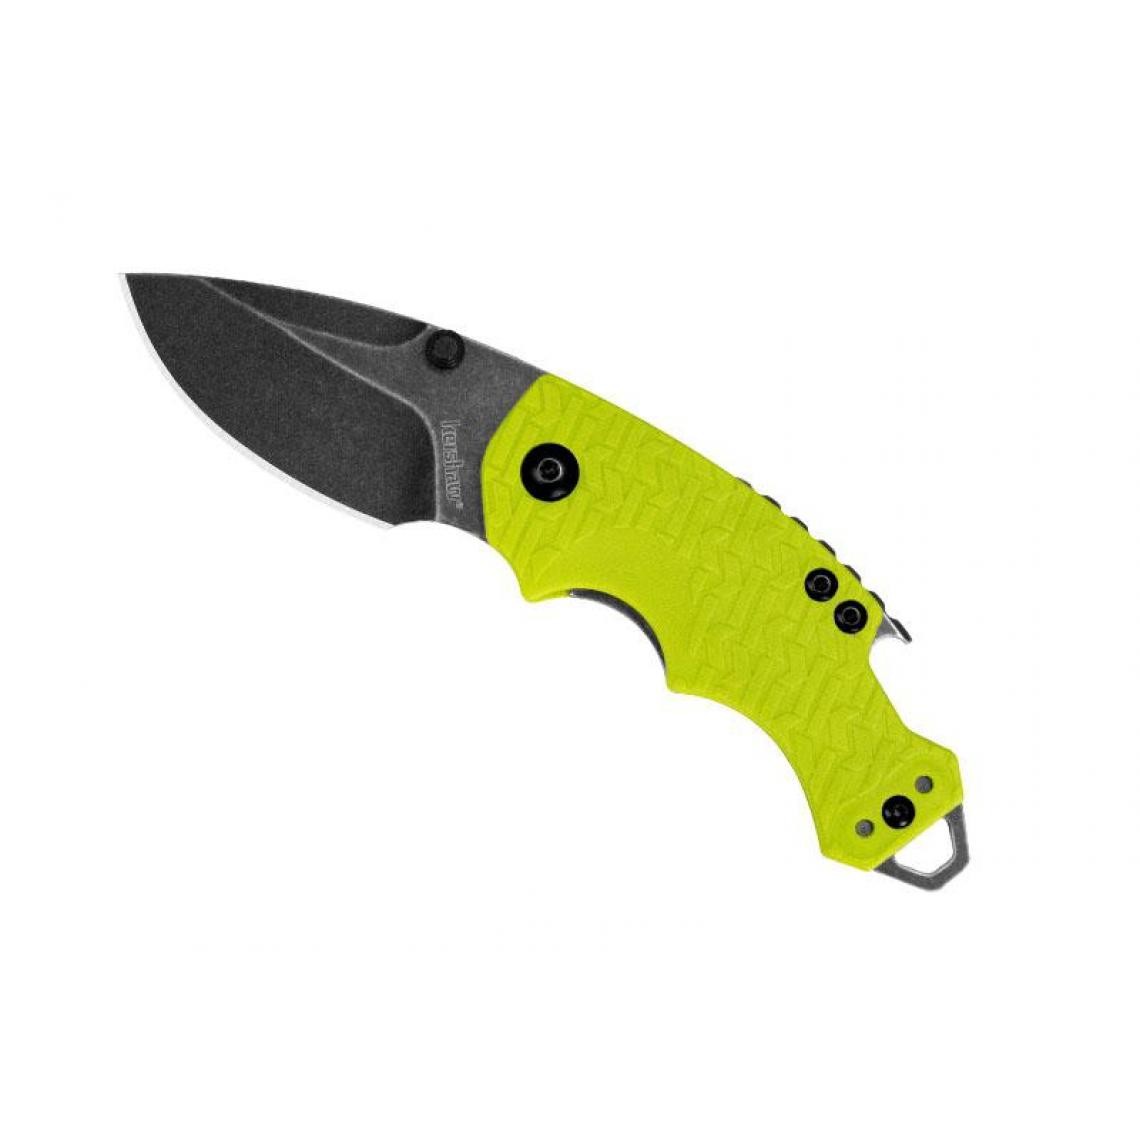 Divers Marques - KERSHAW - KS.8700LIMEBW - COUTEAU KERSHAW SHUFFLE LIME - Outils de coupe